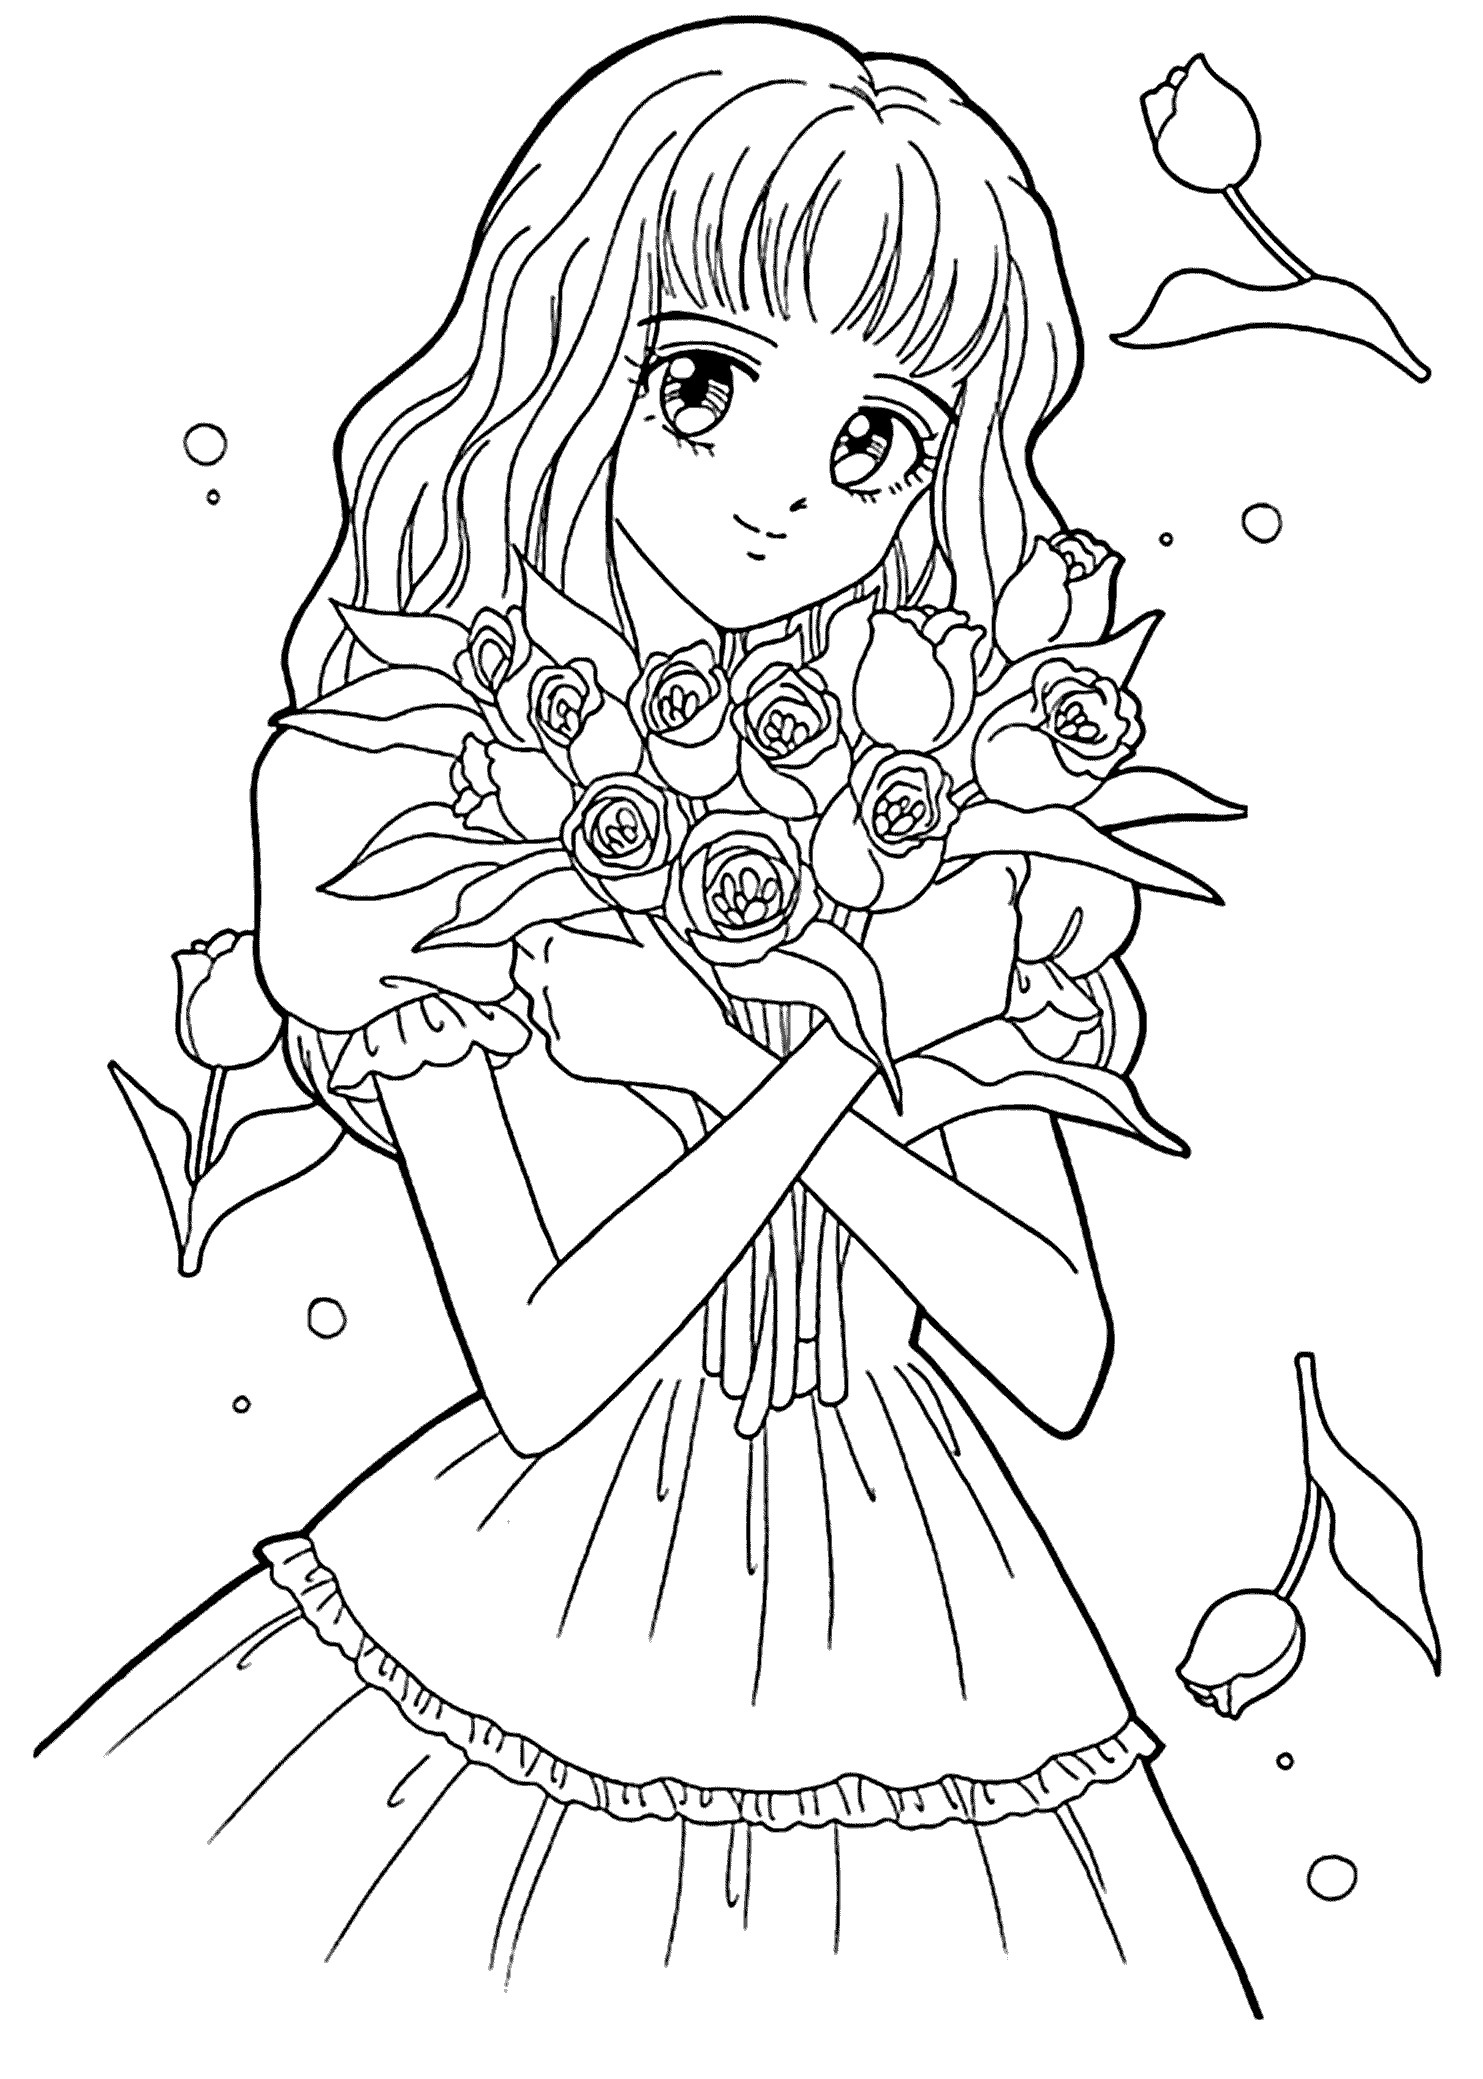 Coloring Book Pages For Teenage Girls
 Best Free Printable Coloring Pages for Kids and Teens